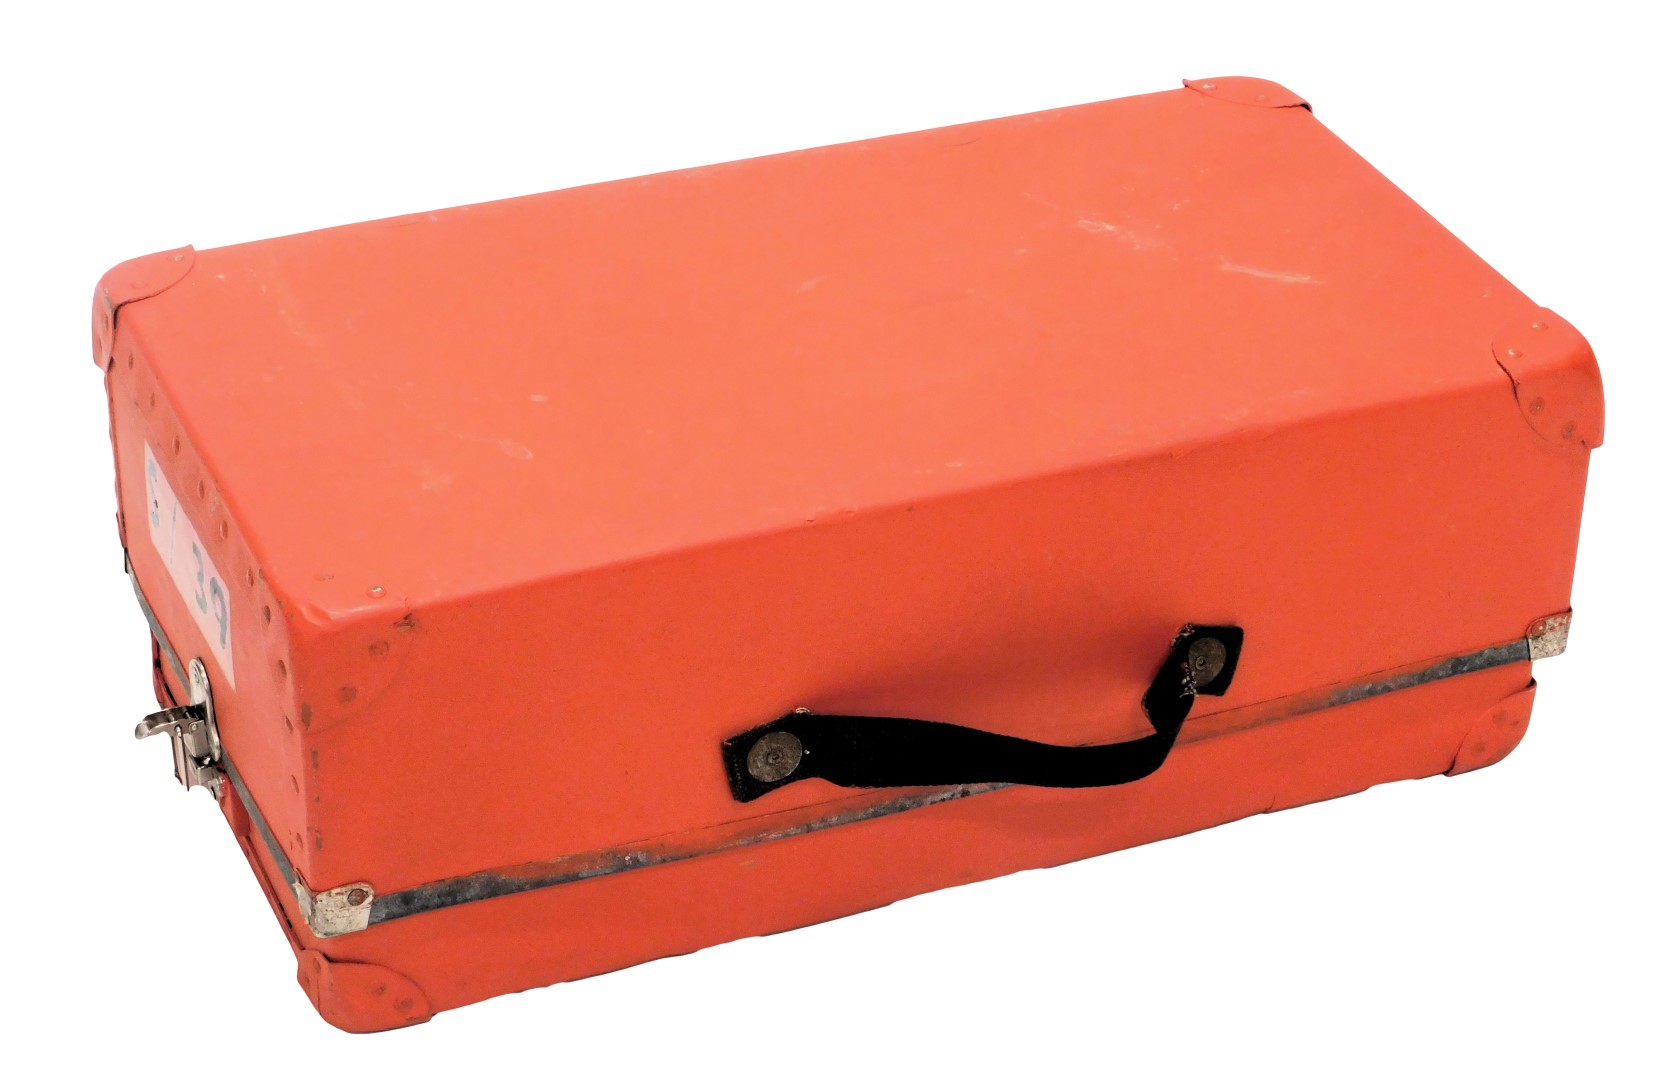 A specimen case, painted in red, 24cm high, 60cm wide, and 32cm deep.